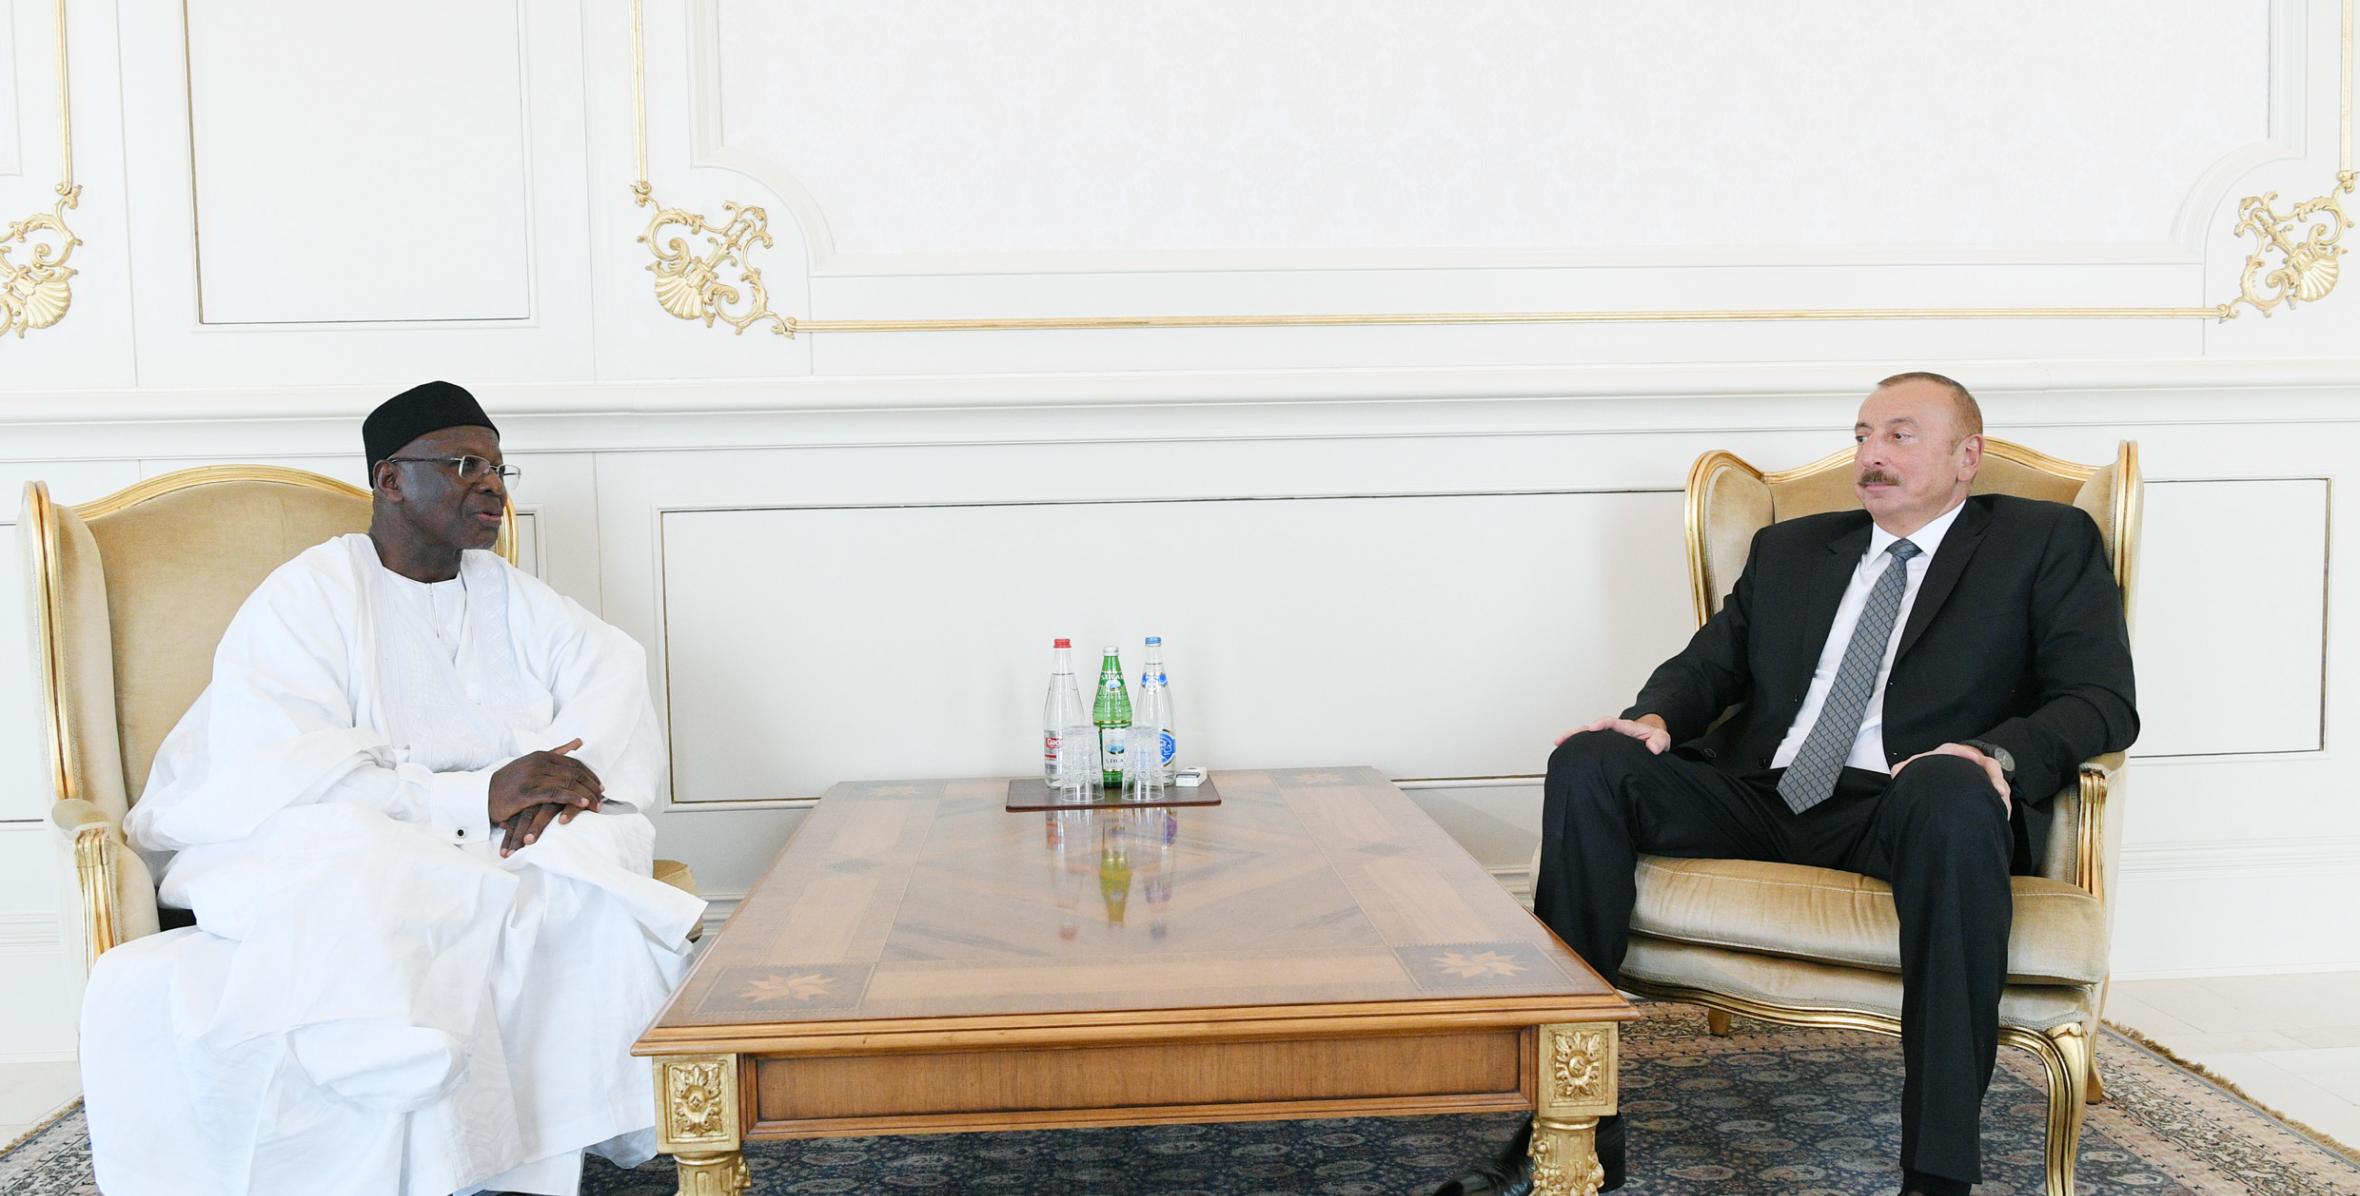 Ilham Aliyev received credentials of newly appointed ambassador of Benin